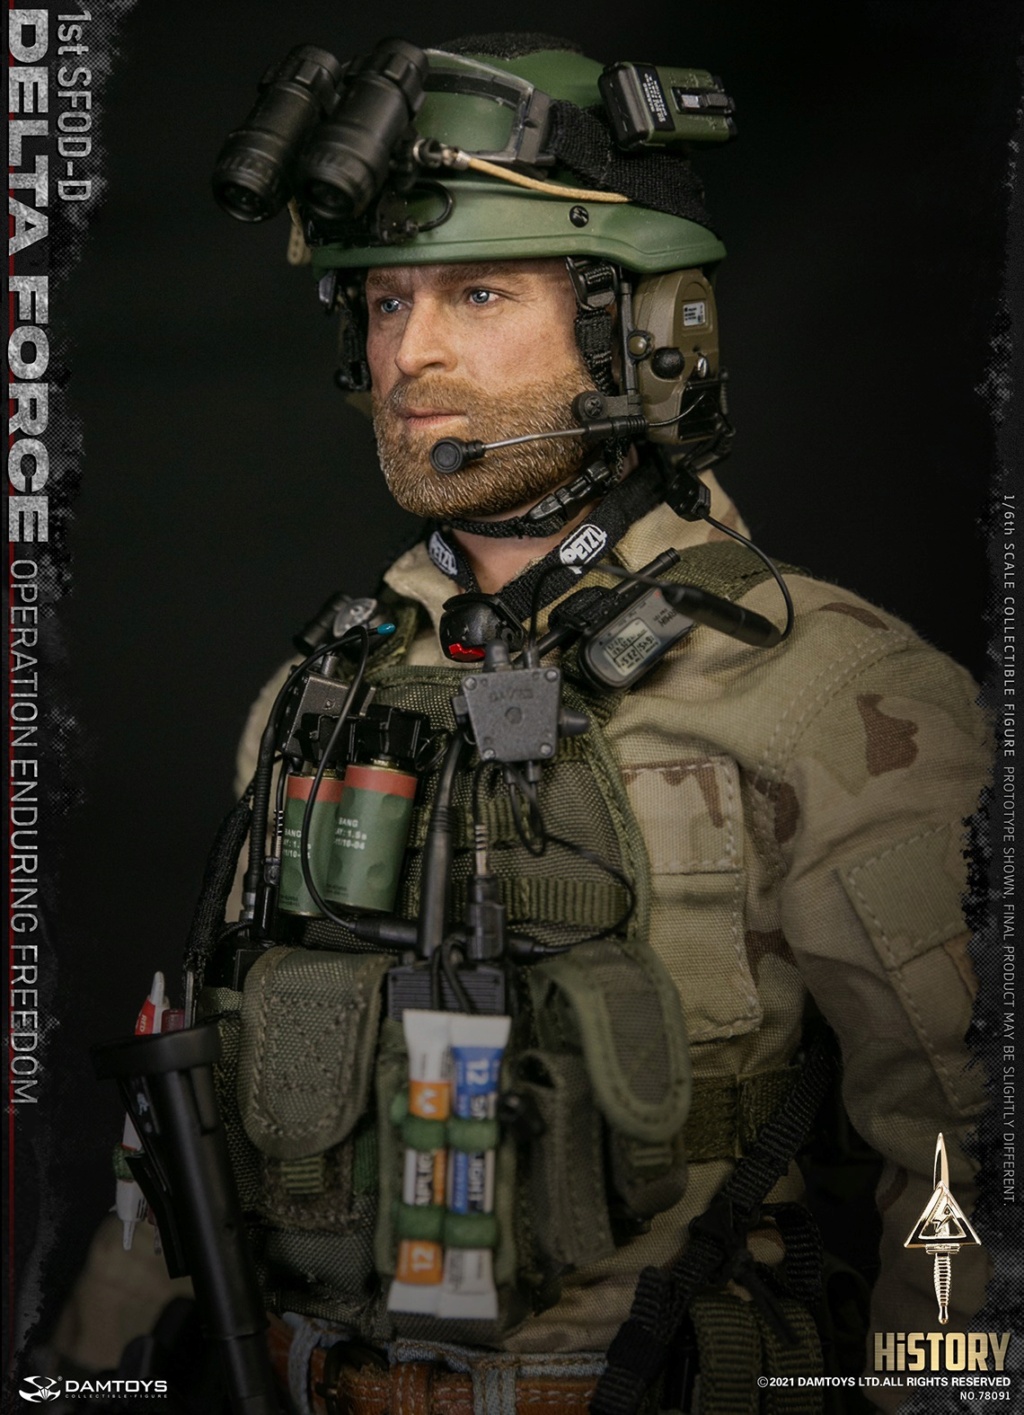 DeltaForces - NEW PRODUCT: DAMTOYS: 1/6 Delta Forces 1st SFOD-D Operation Enduring Freedom #78091 10521610